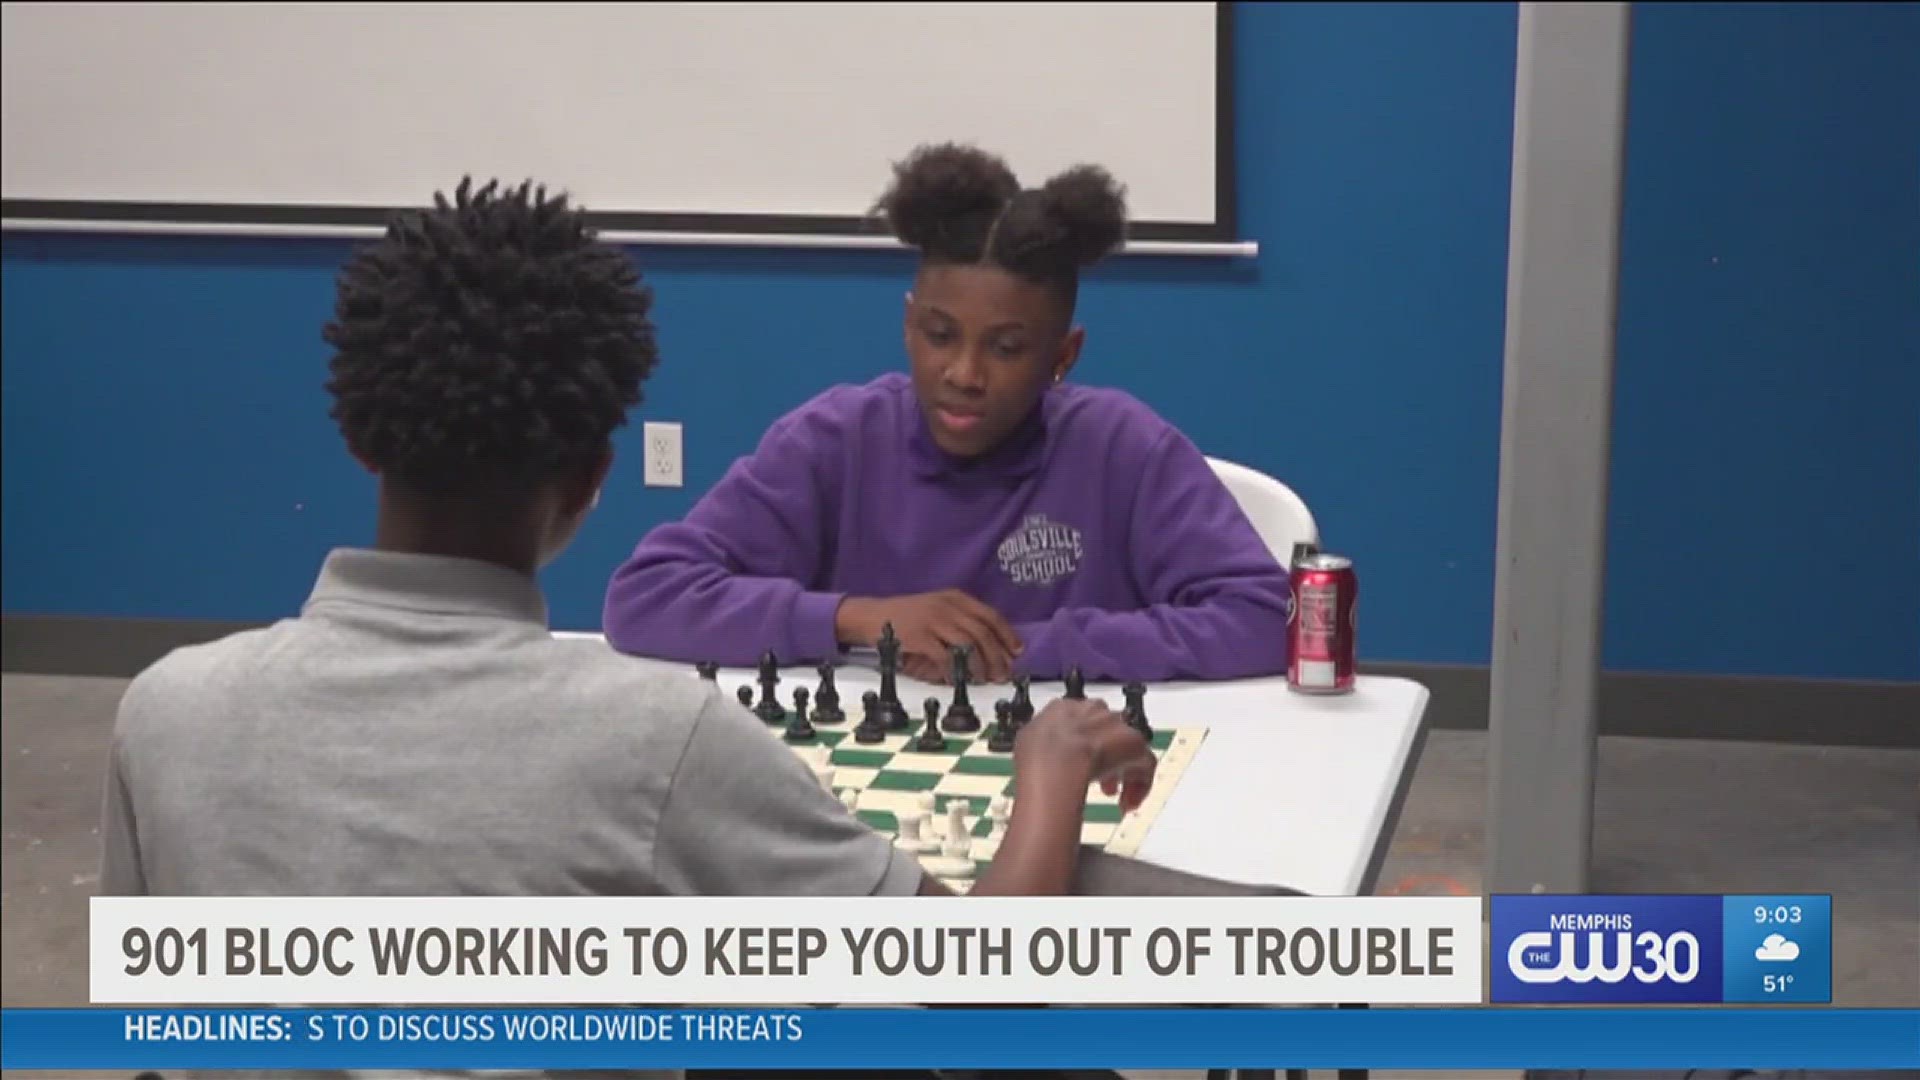 One of the methods 901 Bloc Squad has shifted to in order to help younger crowds, is older adults as mentors in the program.